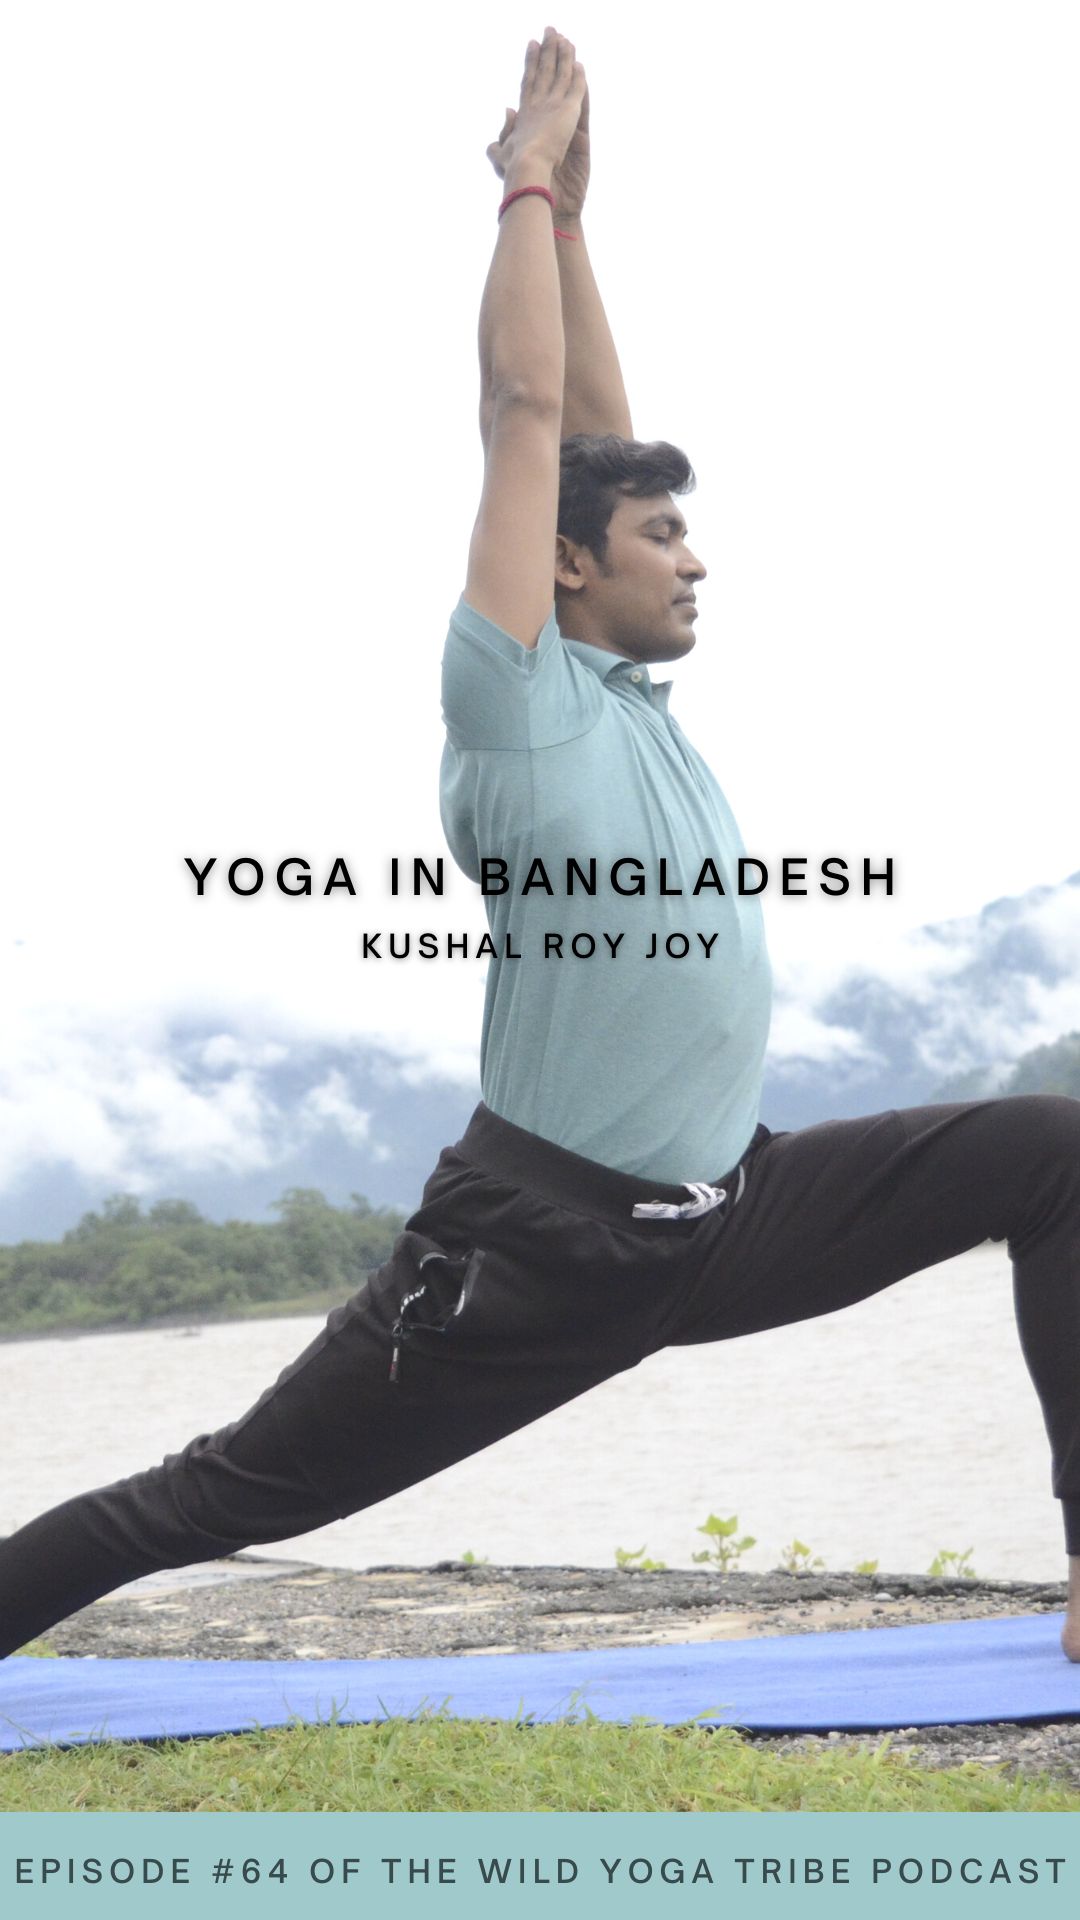 Meet Kushal Roy Joy a yoga teacher from Bangladesh who is the founder of the first yoga teacher training center in his country. Welcome to yoga in Bangladesh!